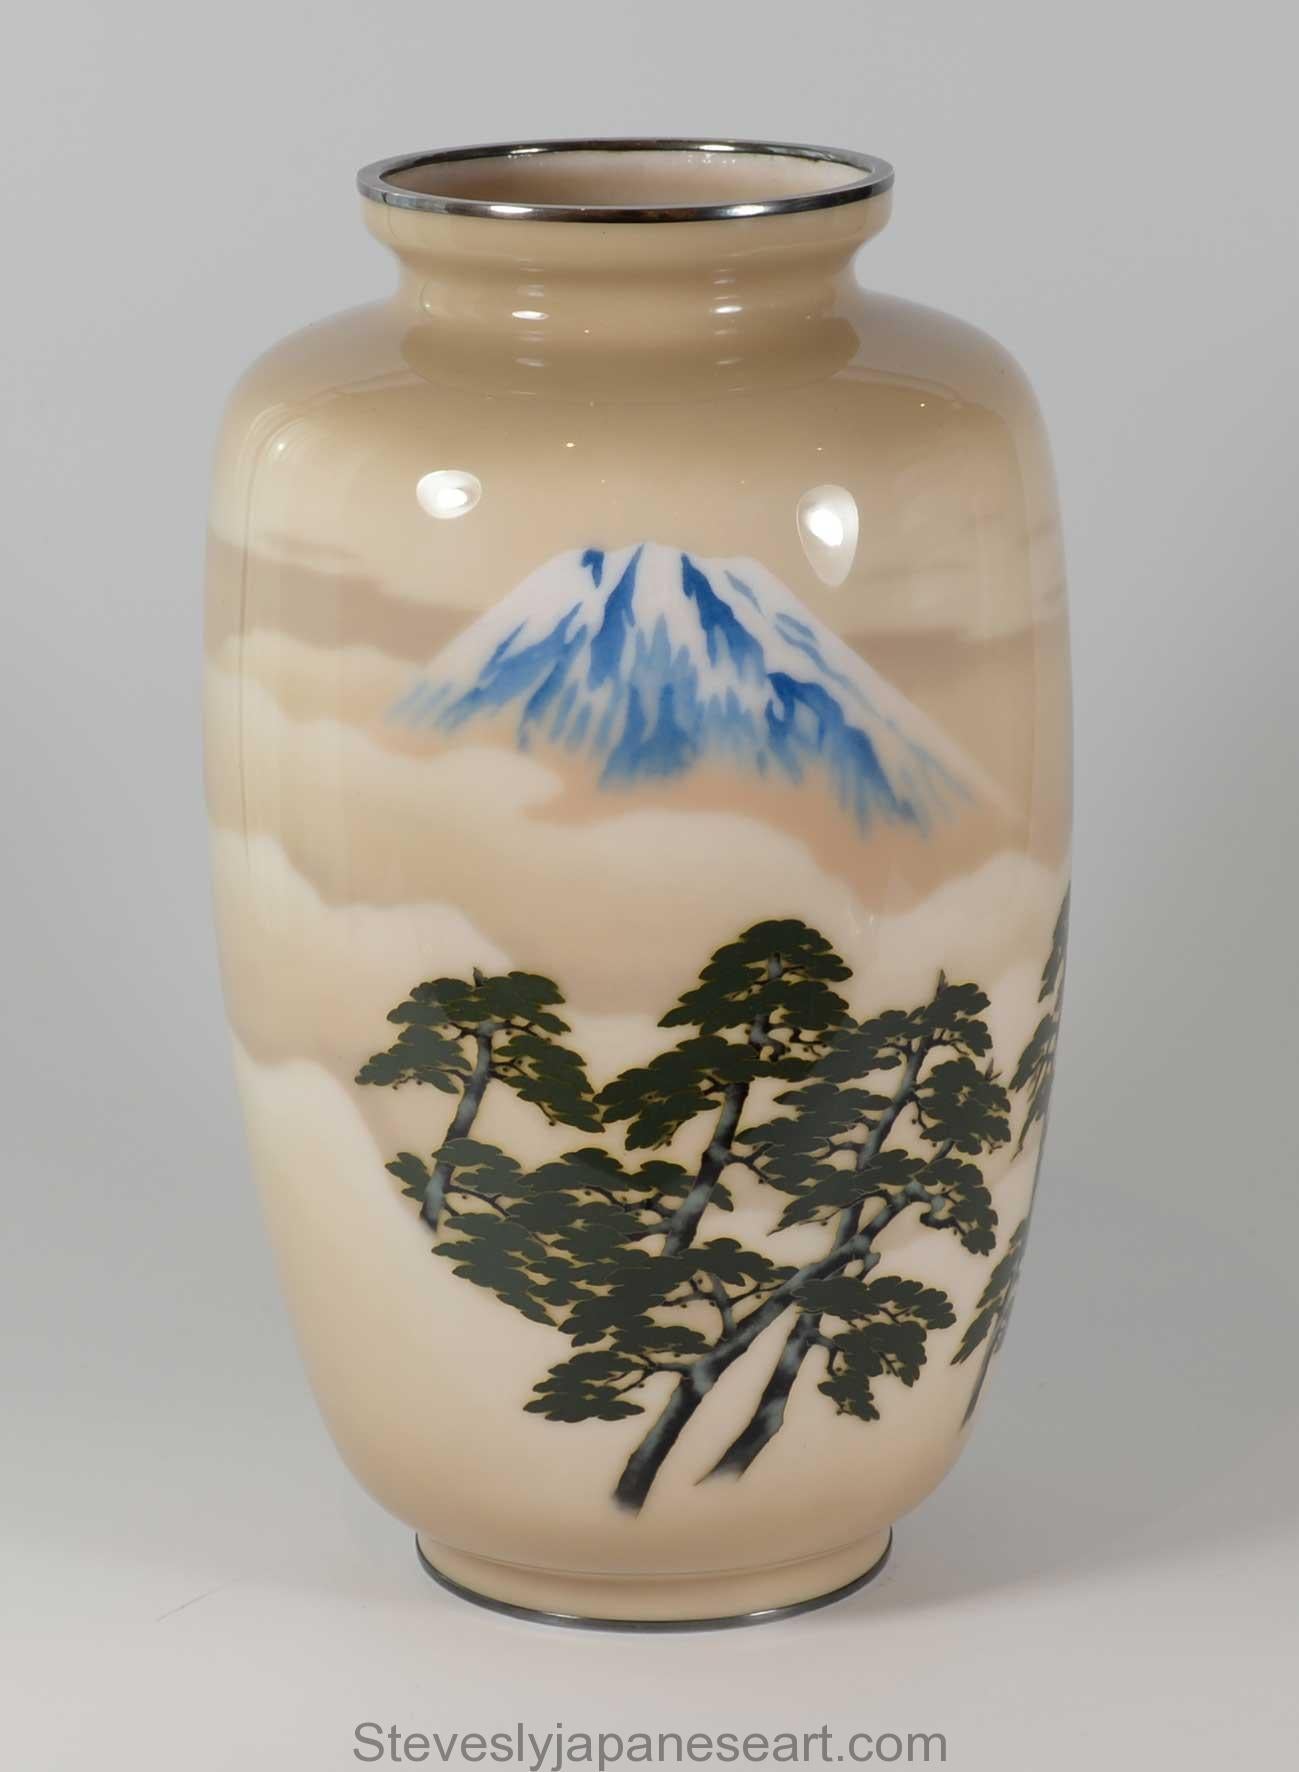 As part of our Japanese works of art collection we are delighted to offer this large Taisho period 1912-1926 , circa 1920’s , Cloisonné vase by the Ando Jubei company , this large scale high quality vase depicts a mountainous scene , a striking snow